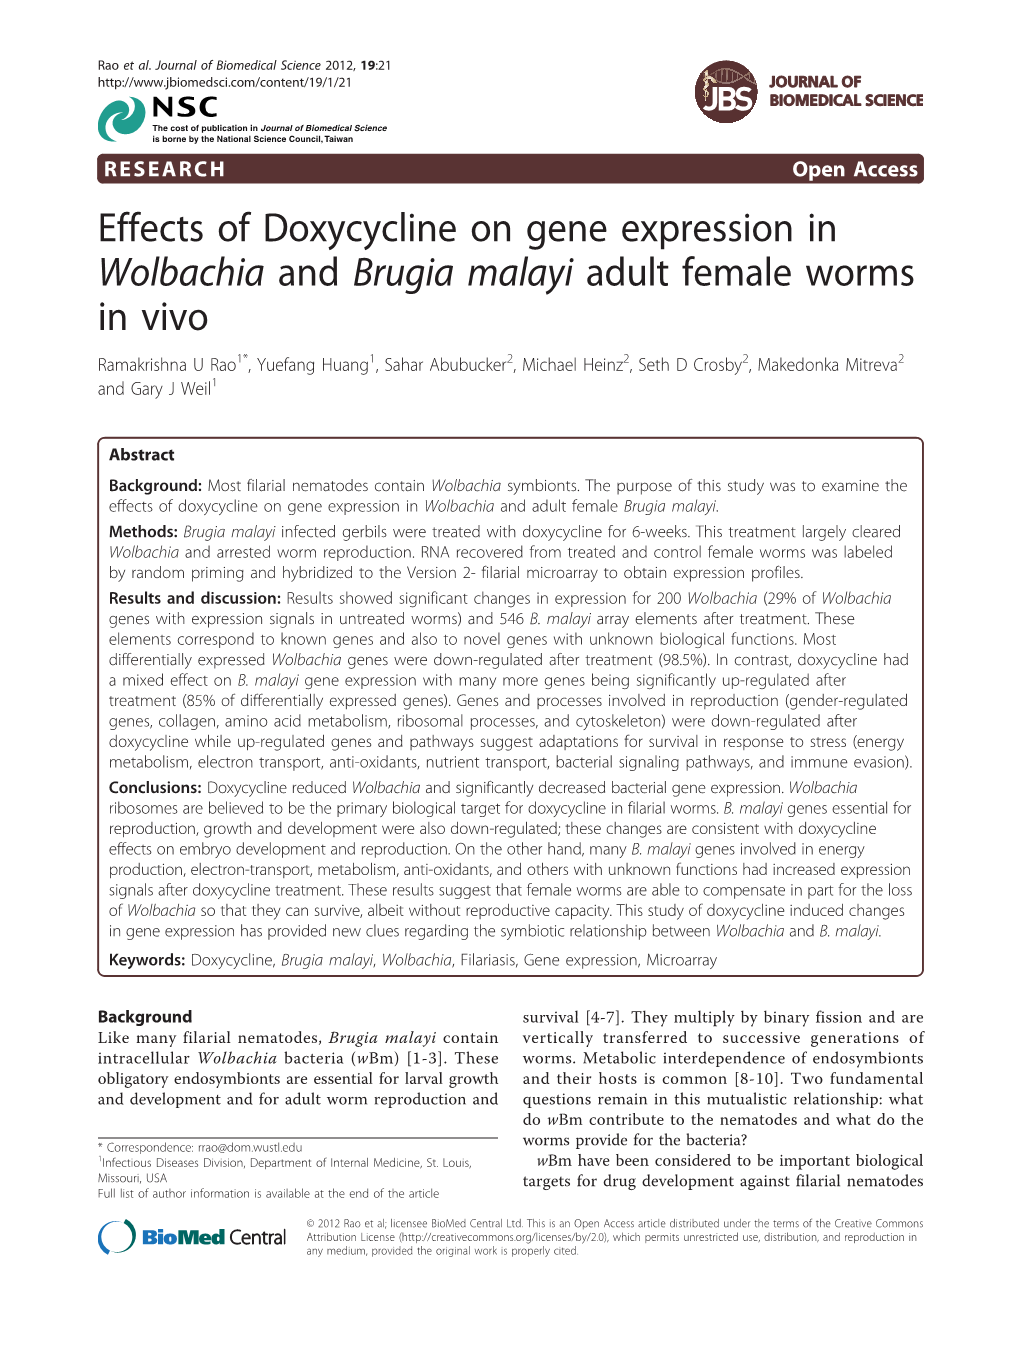 Effects of Doxycycline on Gene Expression in Wolbachia And